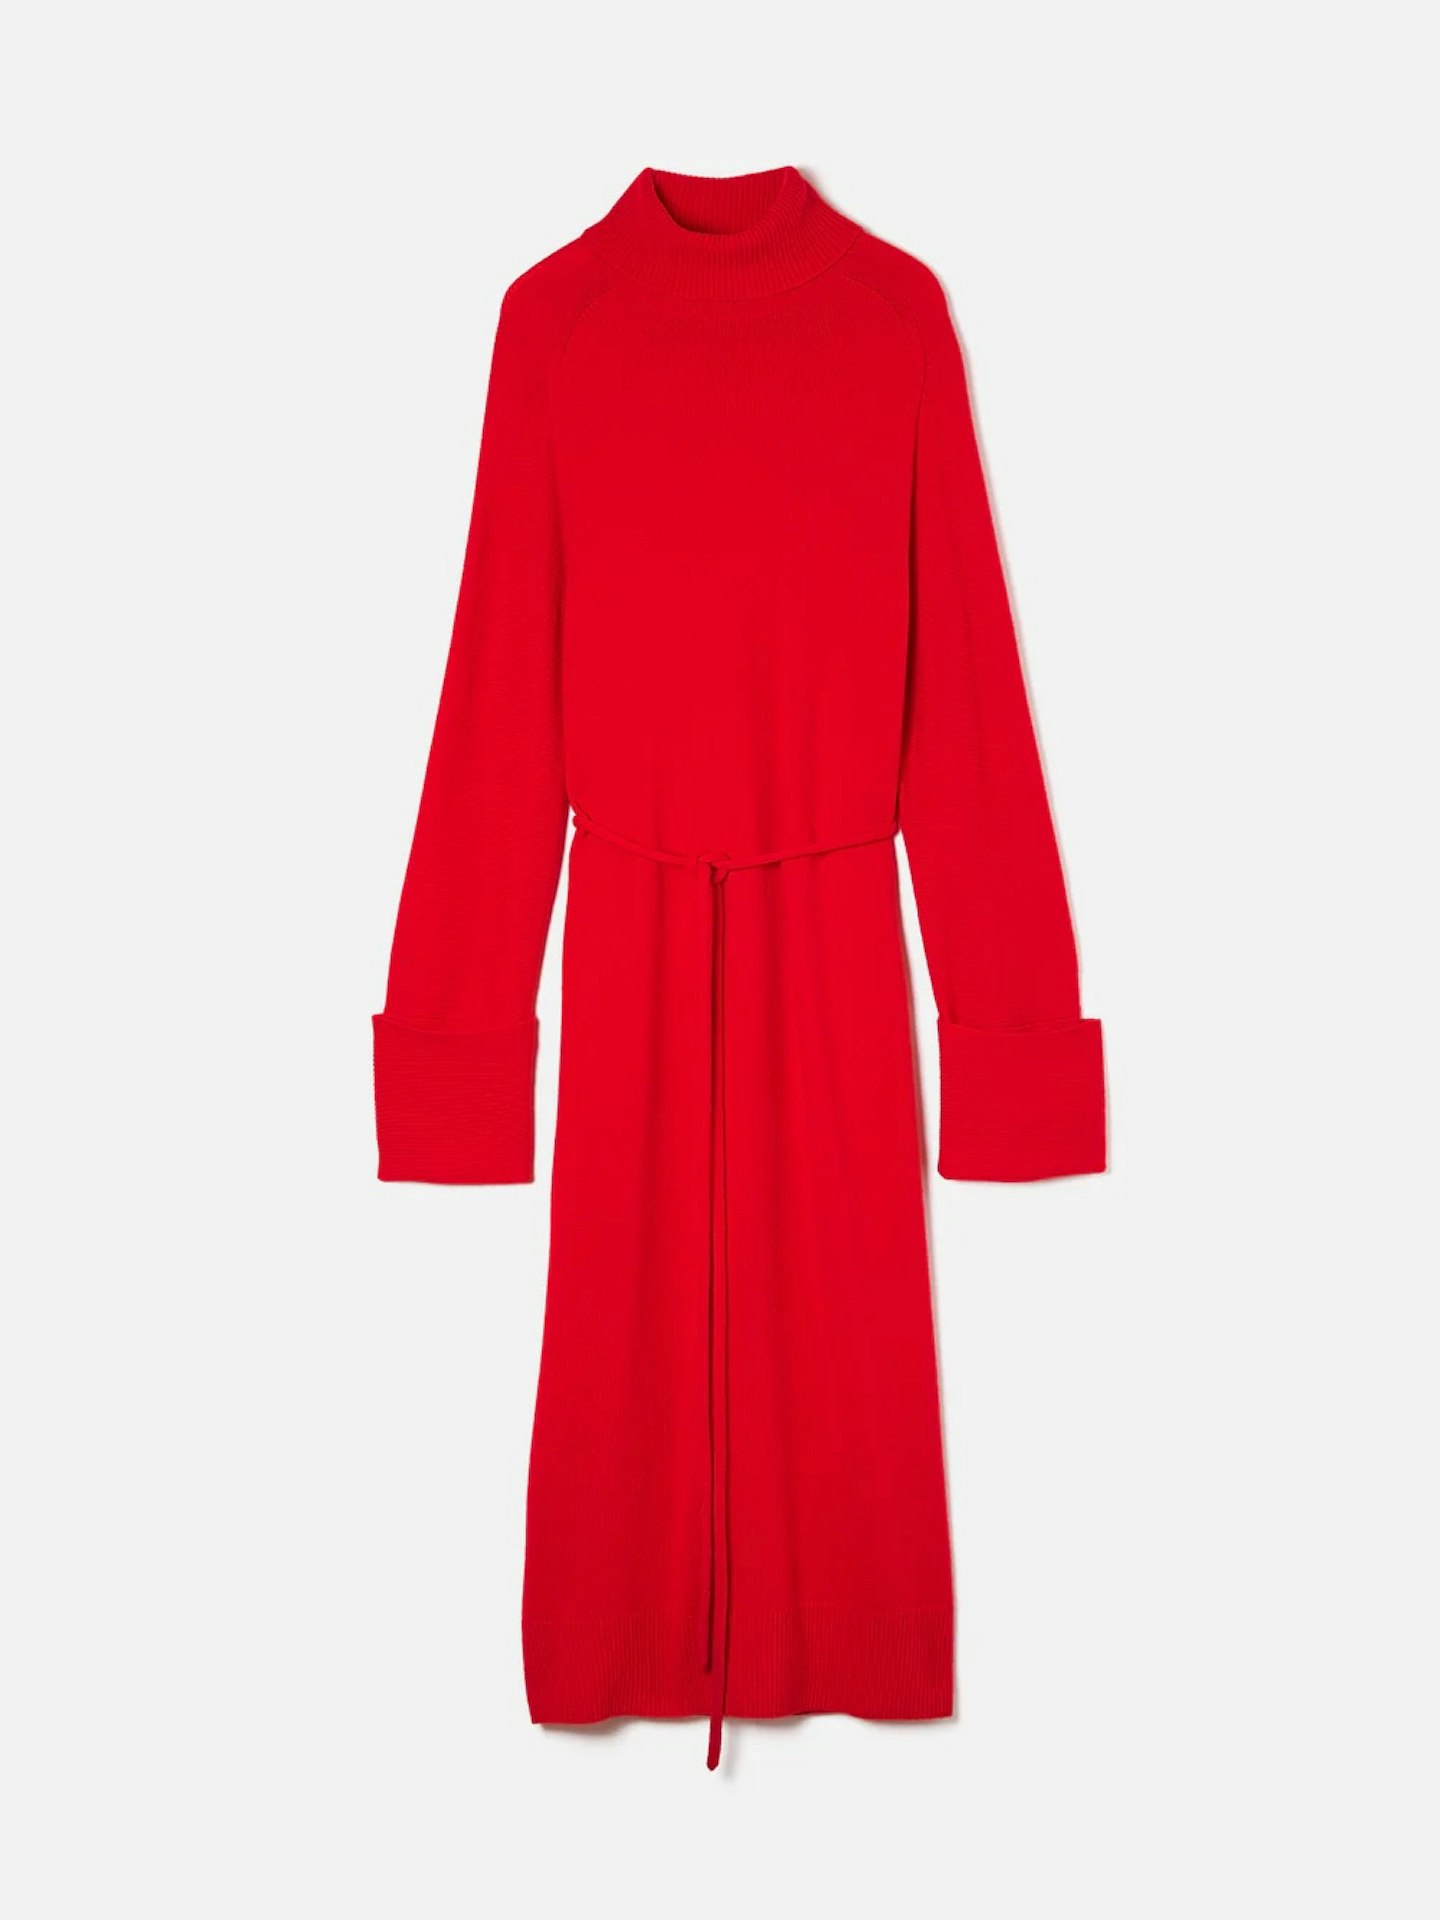 5 Jumper Dresses To Style This Winter, The 411